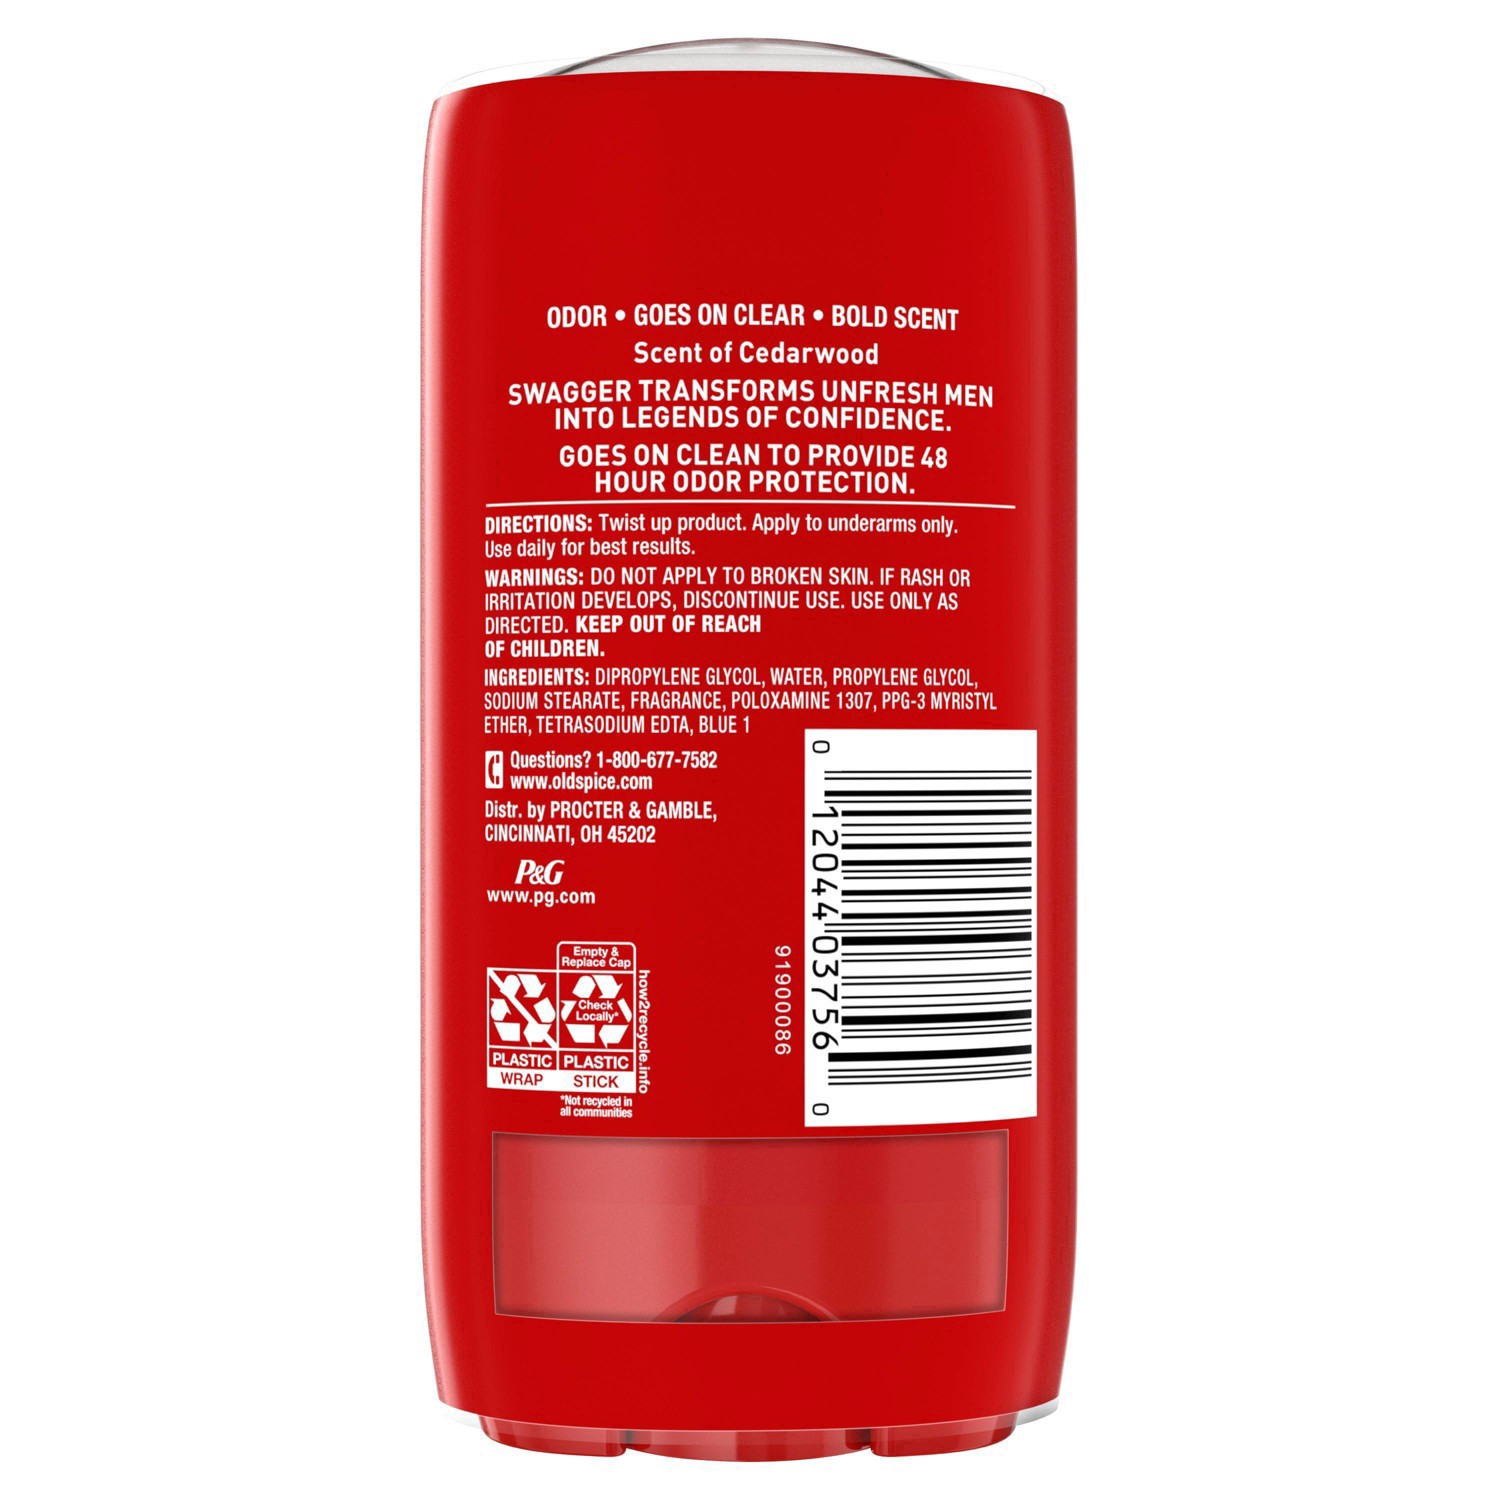 slide 2 of 95, Old Spice Red Collection Swagger Scent Deodorant for Men, Value Pack, 3.0 oz, Pack of 2, 2 ct; 3 oz